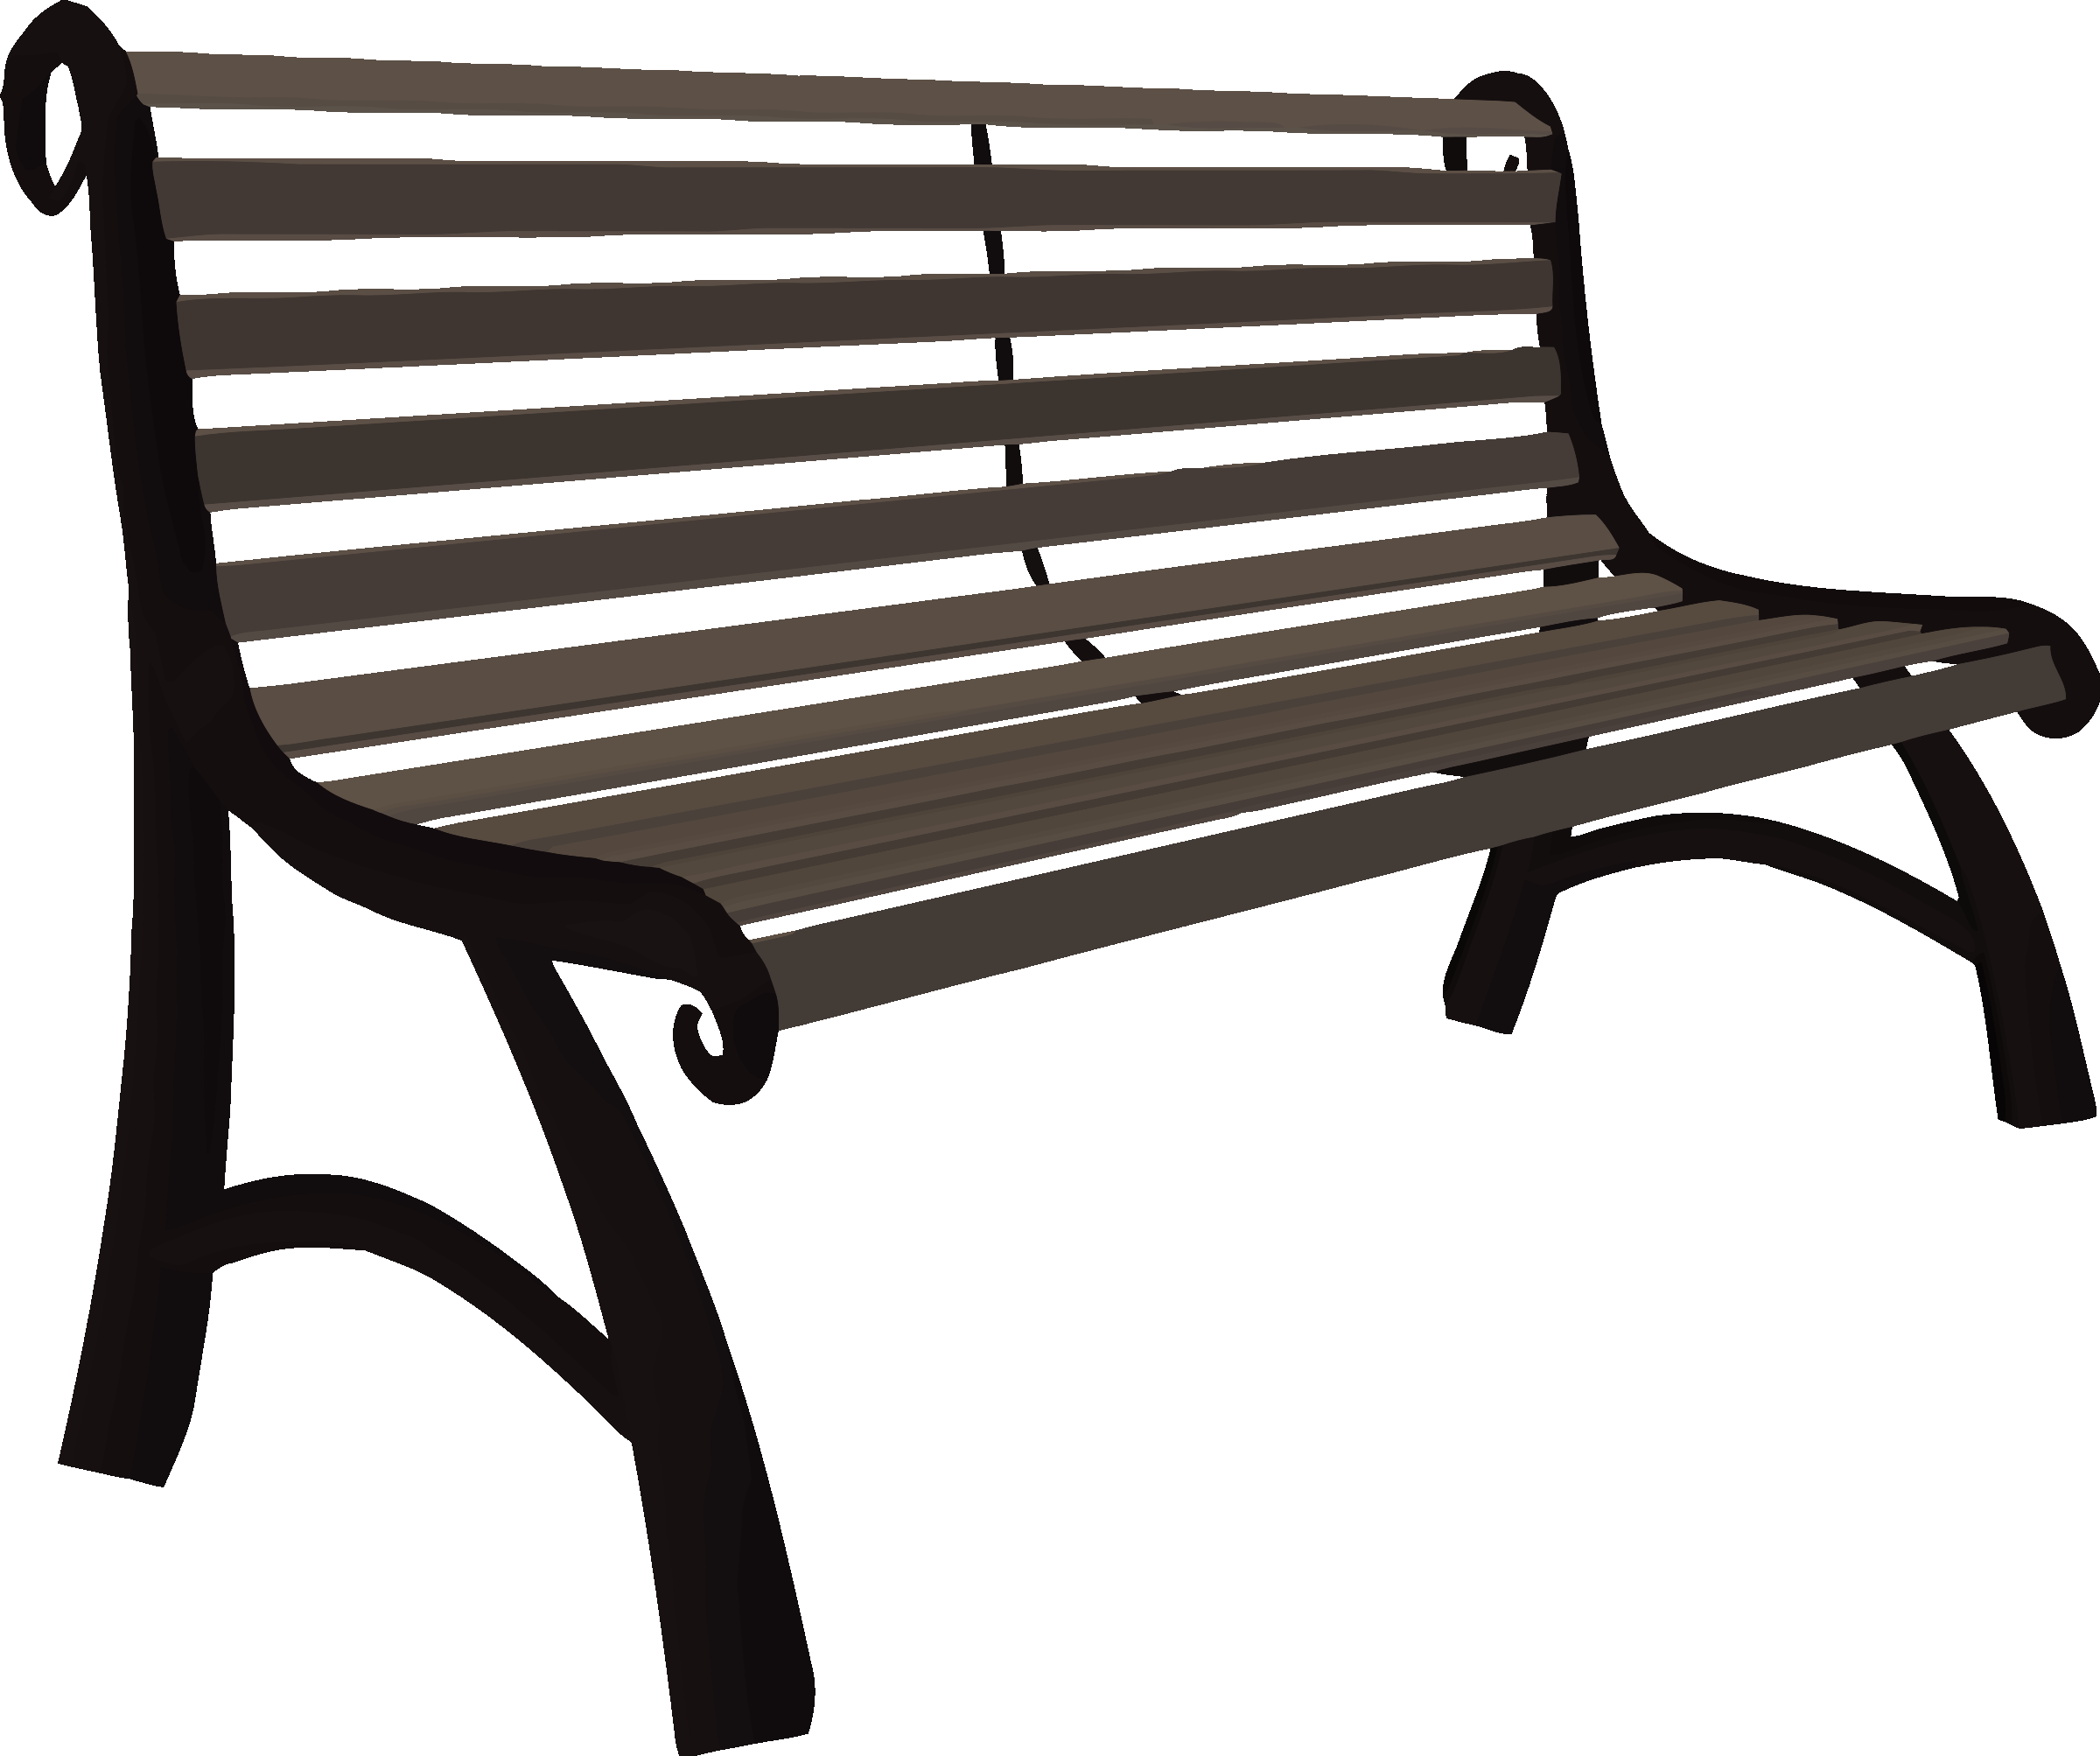 Park clipart small park. Bench big image png